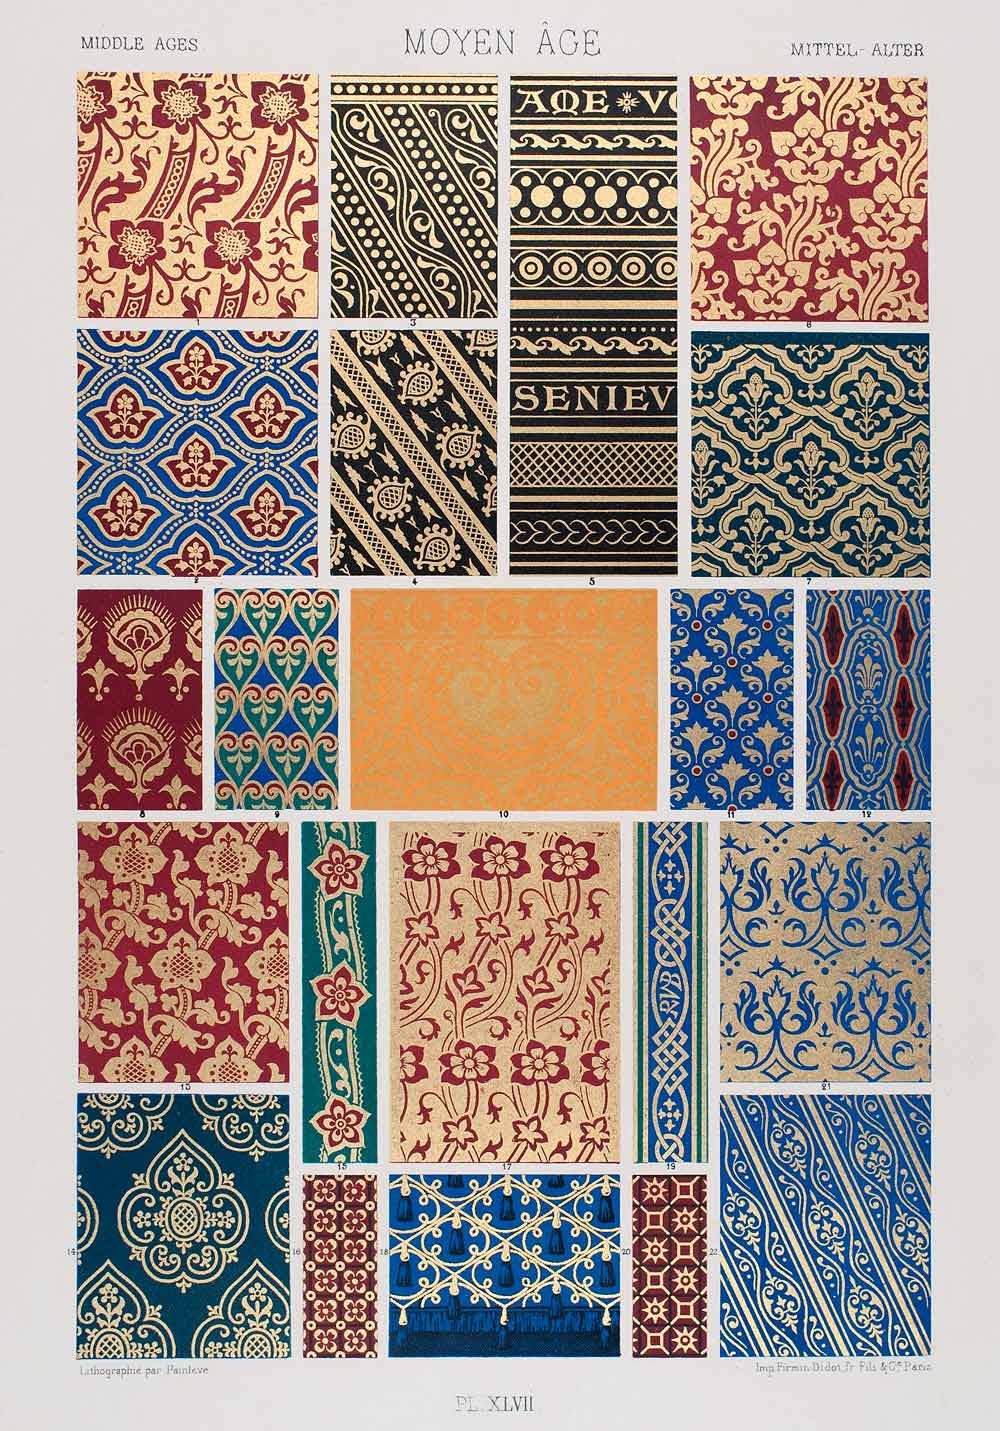 1875 Chromolithograph 15th Century Embroidery Design Pattern Fabric Motif LOR1